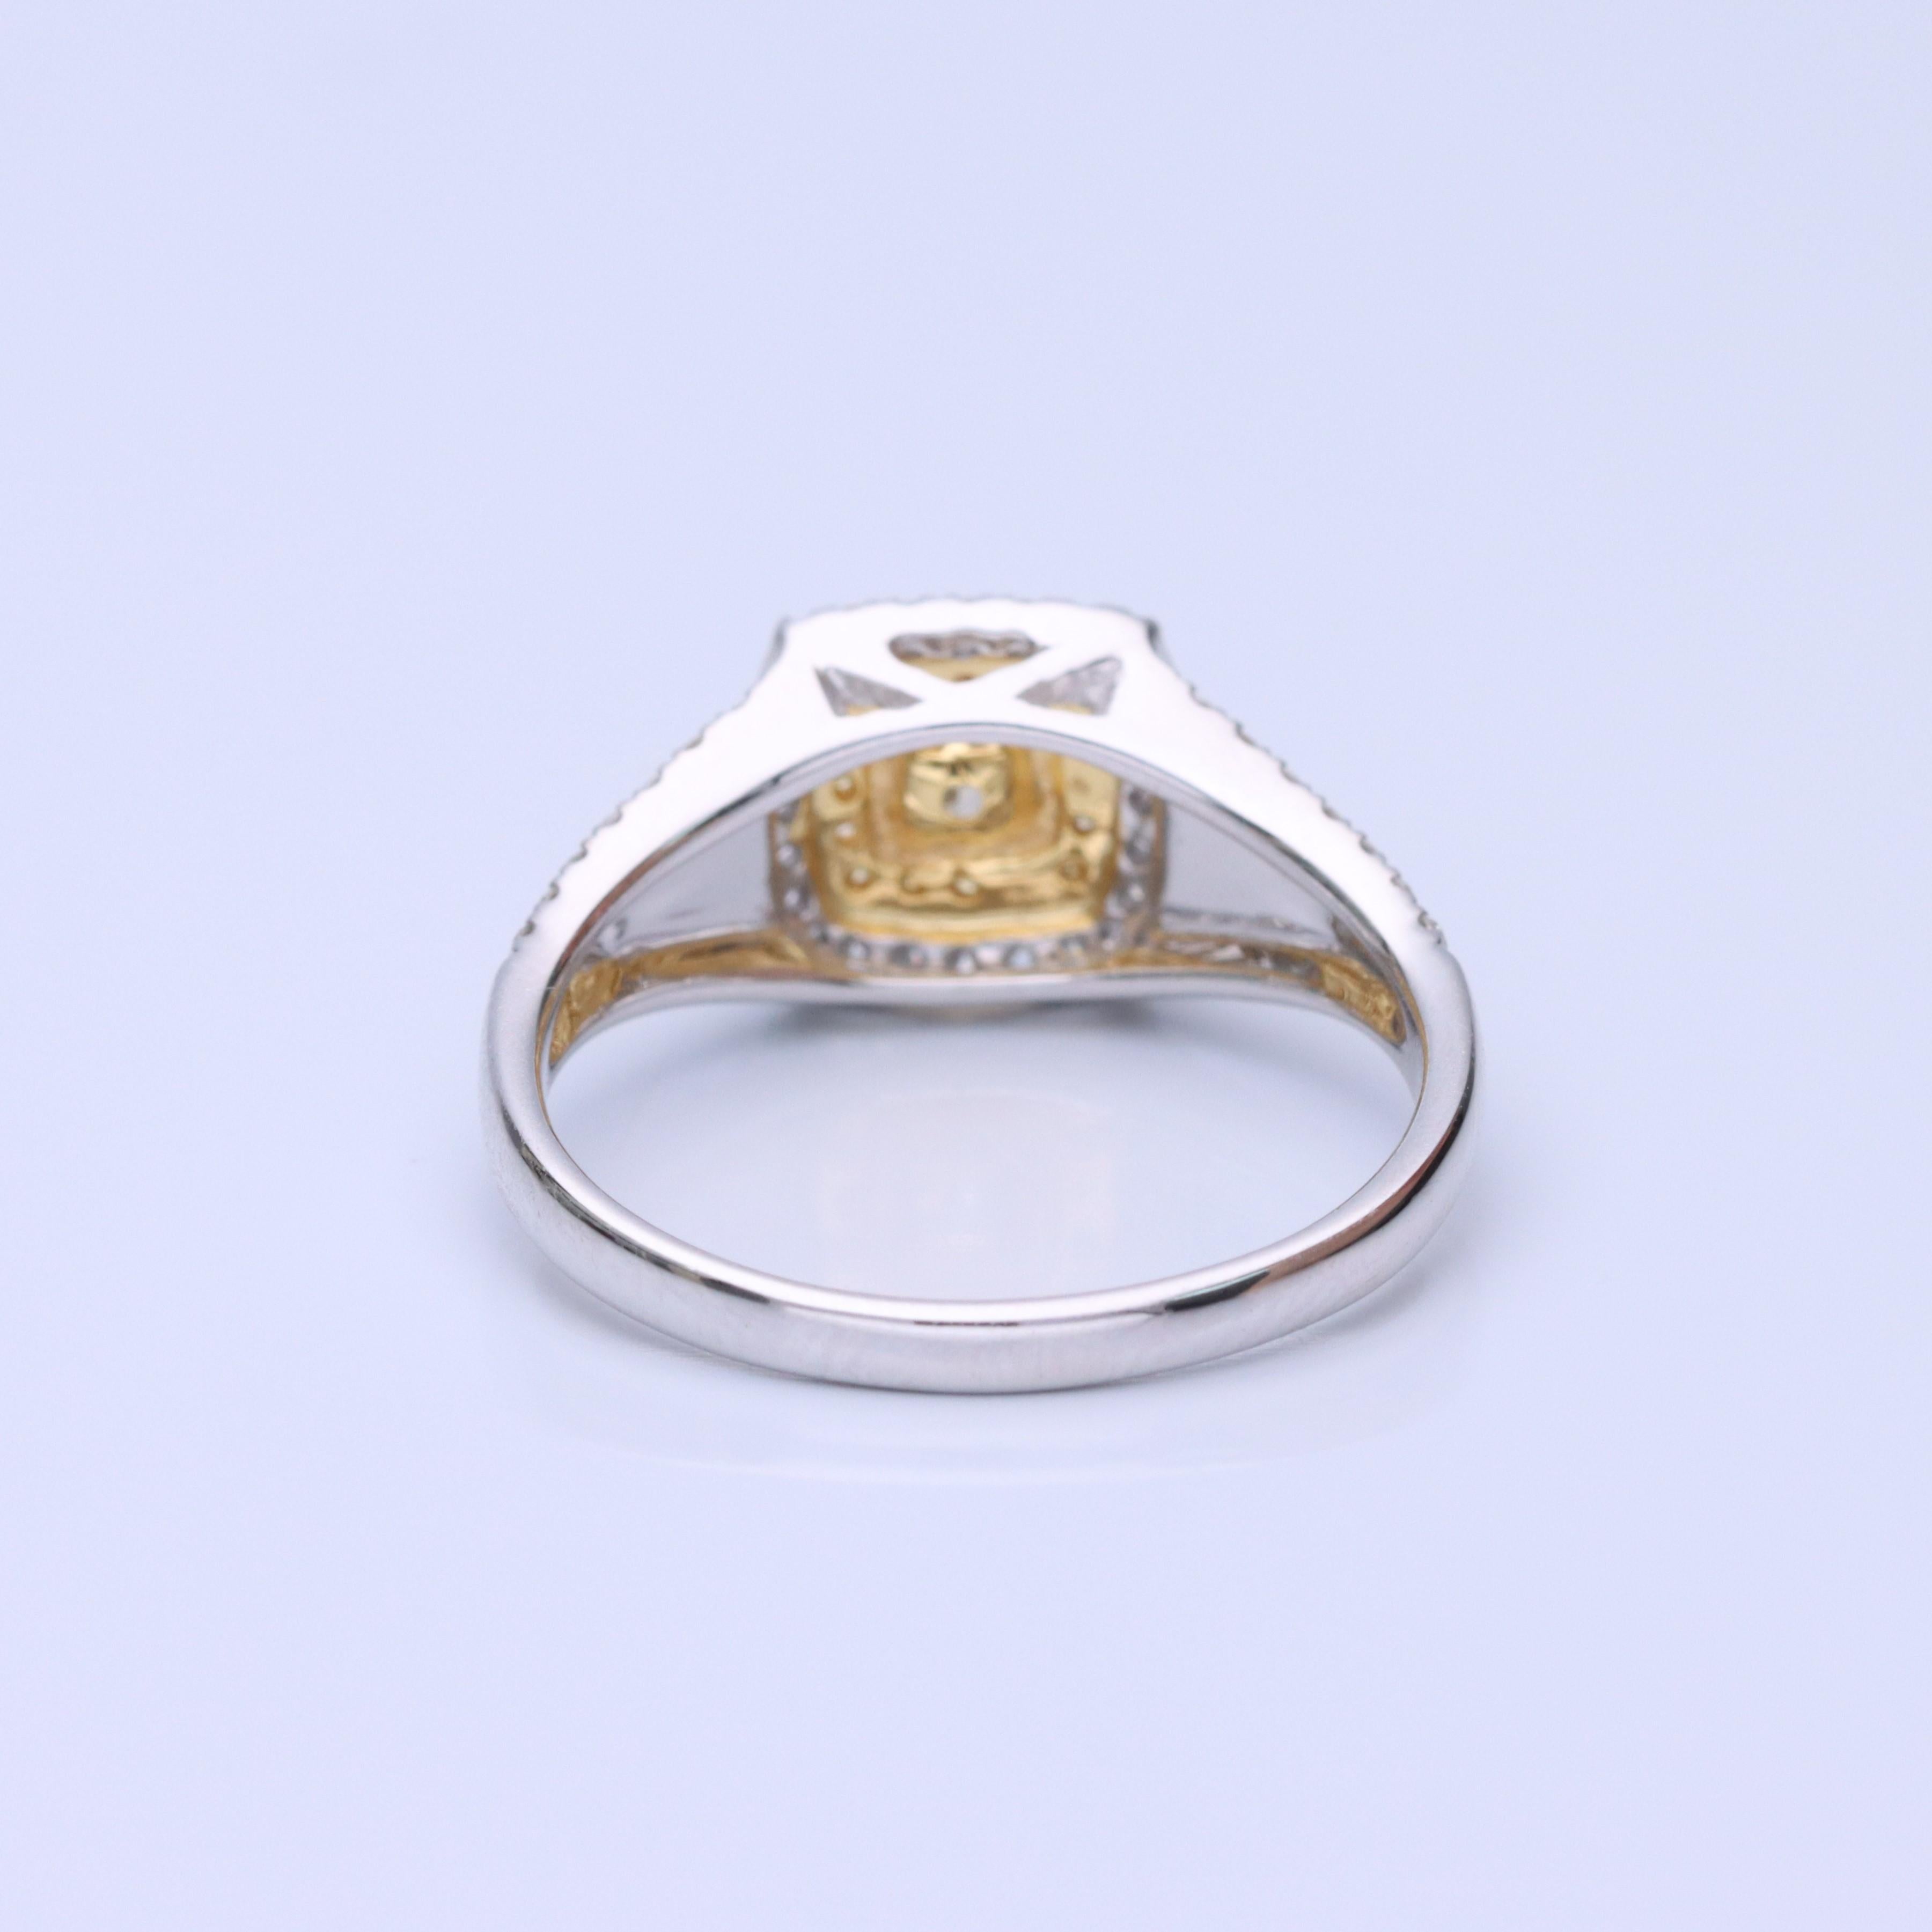 Gin & Grace Cushion-Cut Yellow Diamond with White Diamonds 18k TT Gold Ring In New Condition For Sale In New York, NY